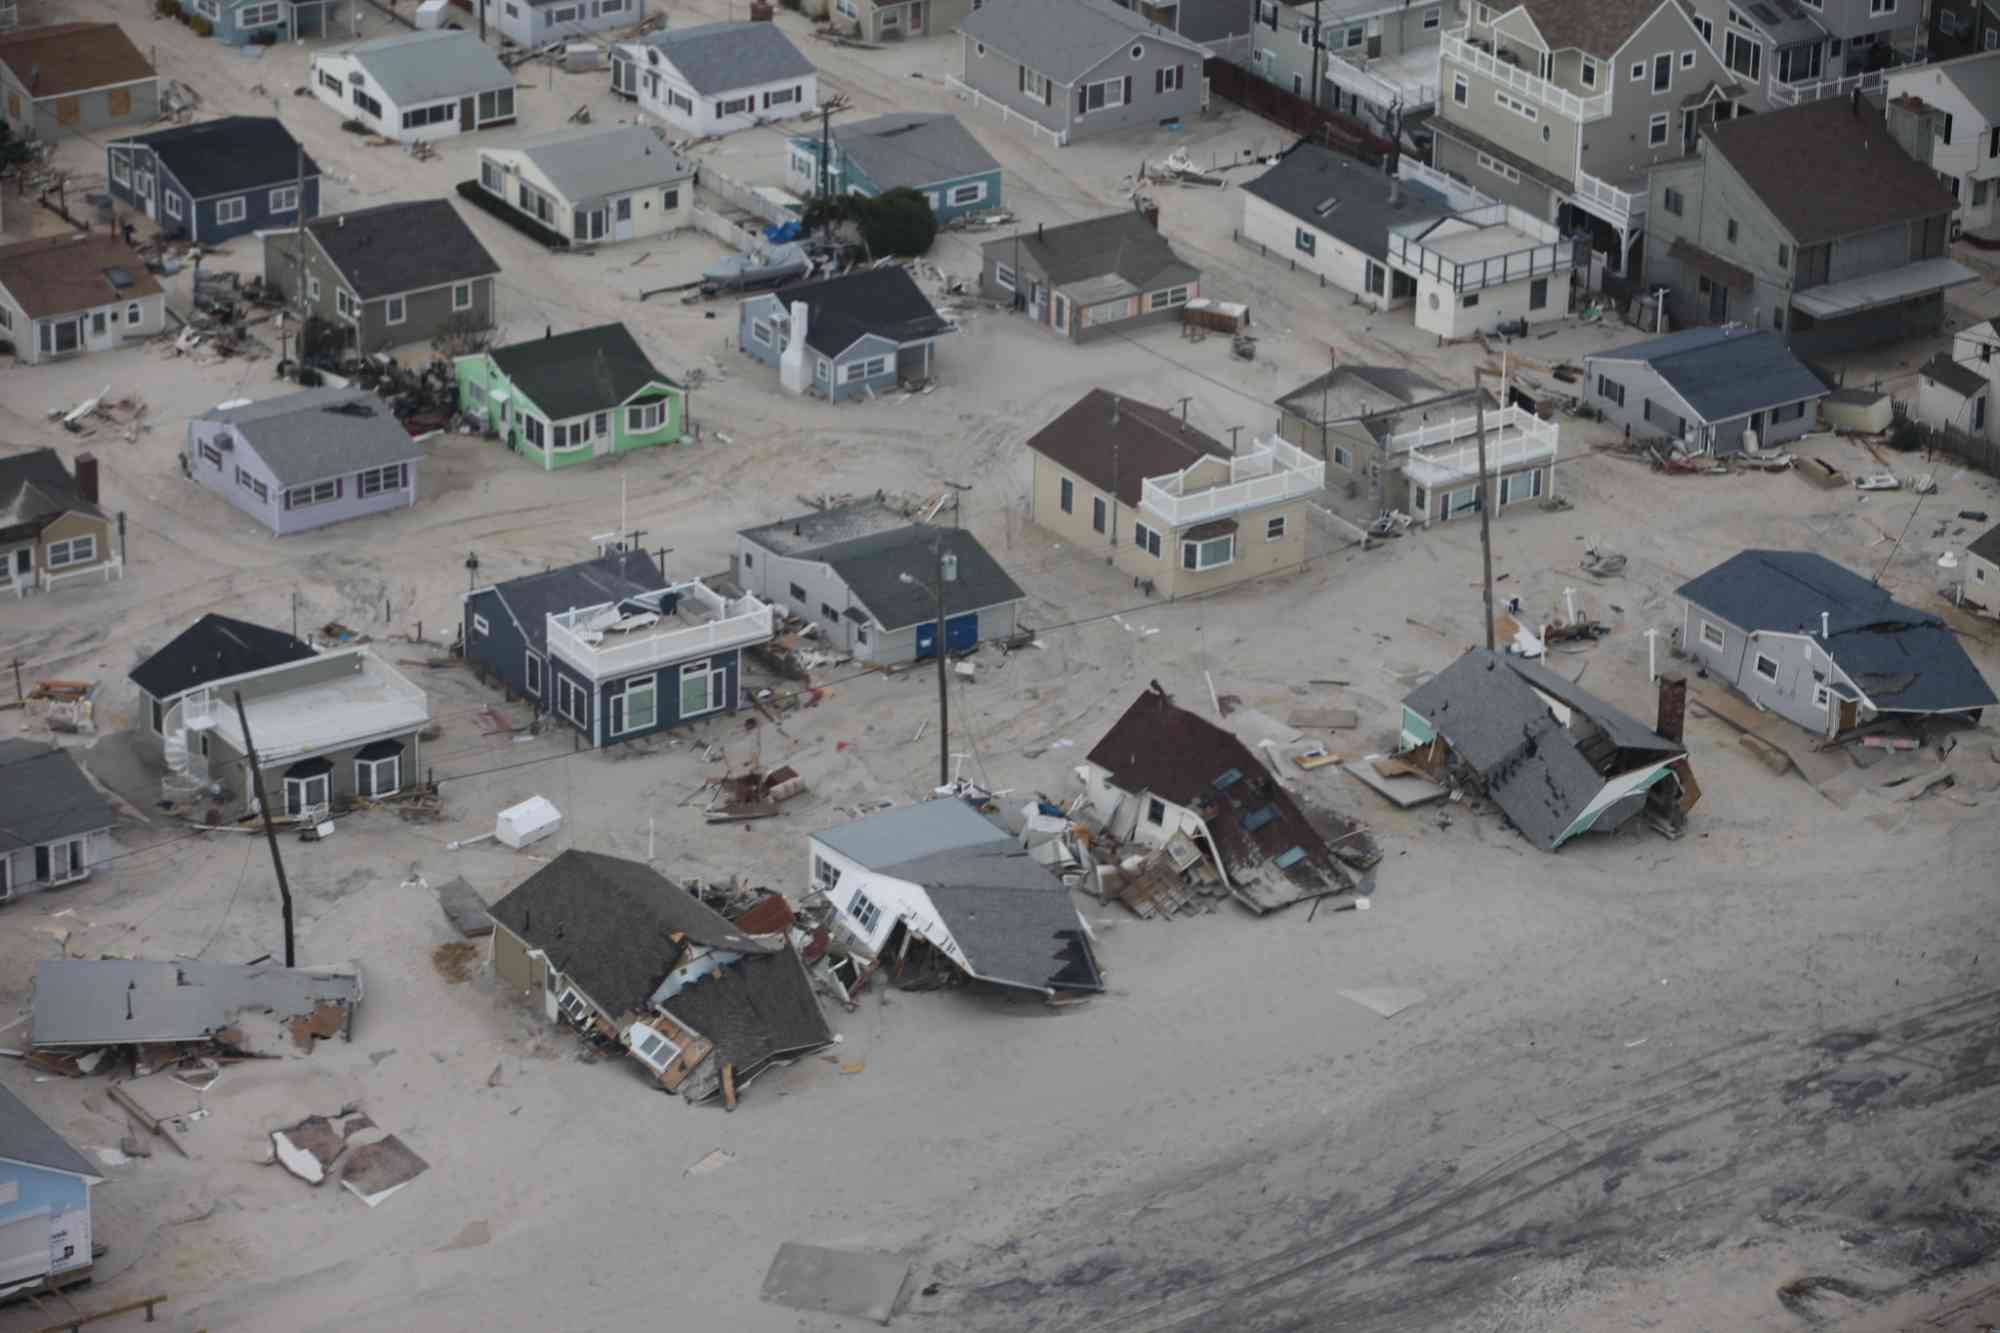 Aerial photo of damaged homes along New Jersey shore after Hurricane Sandy